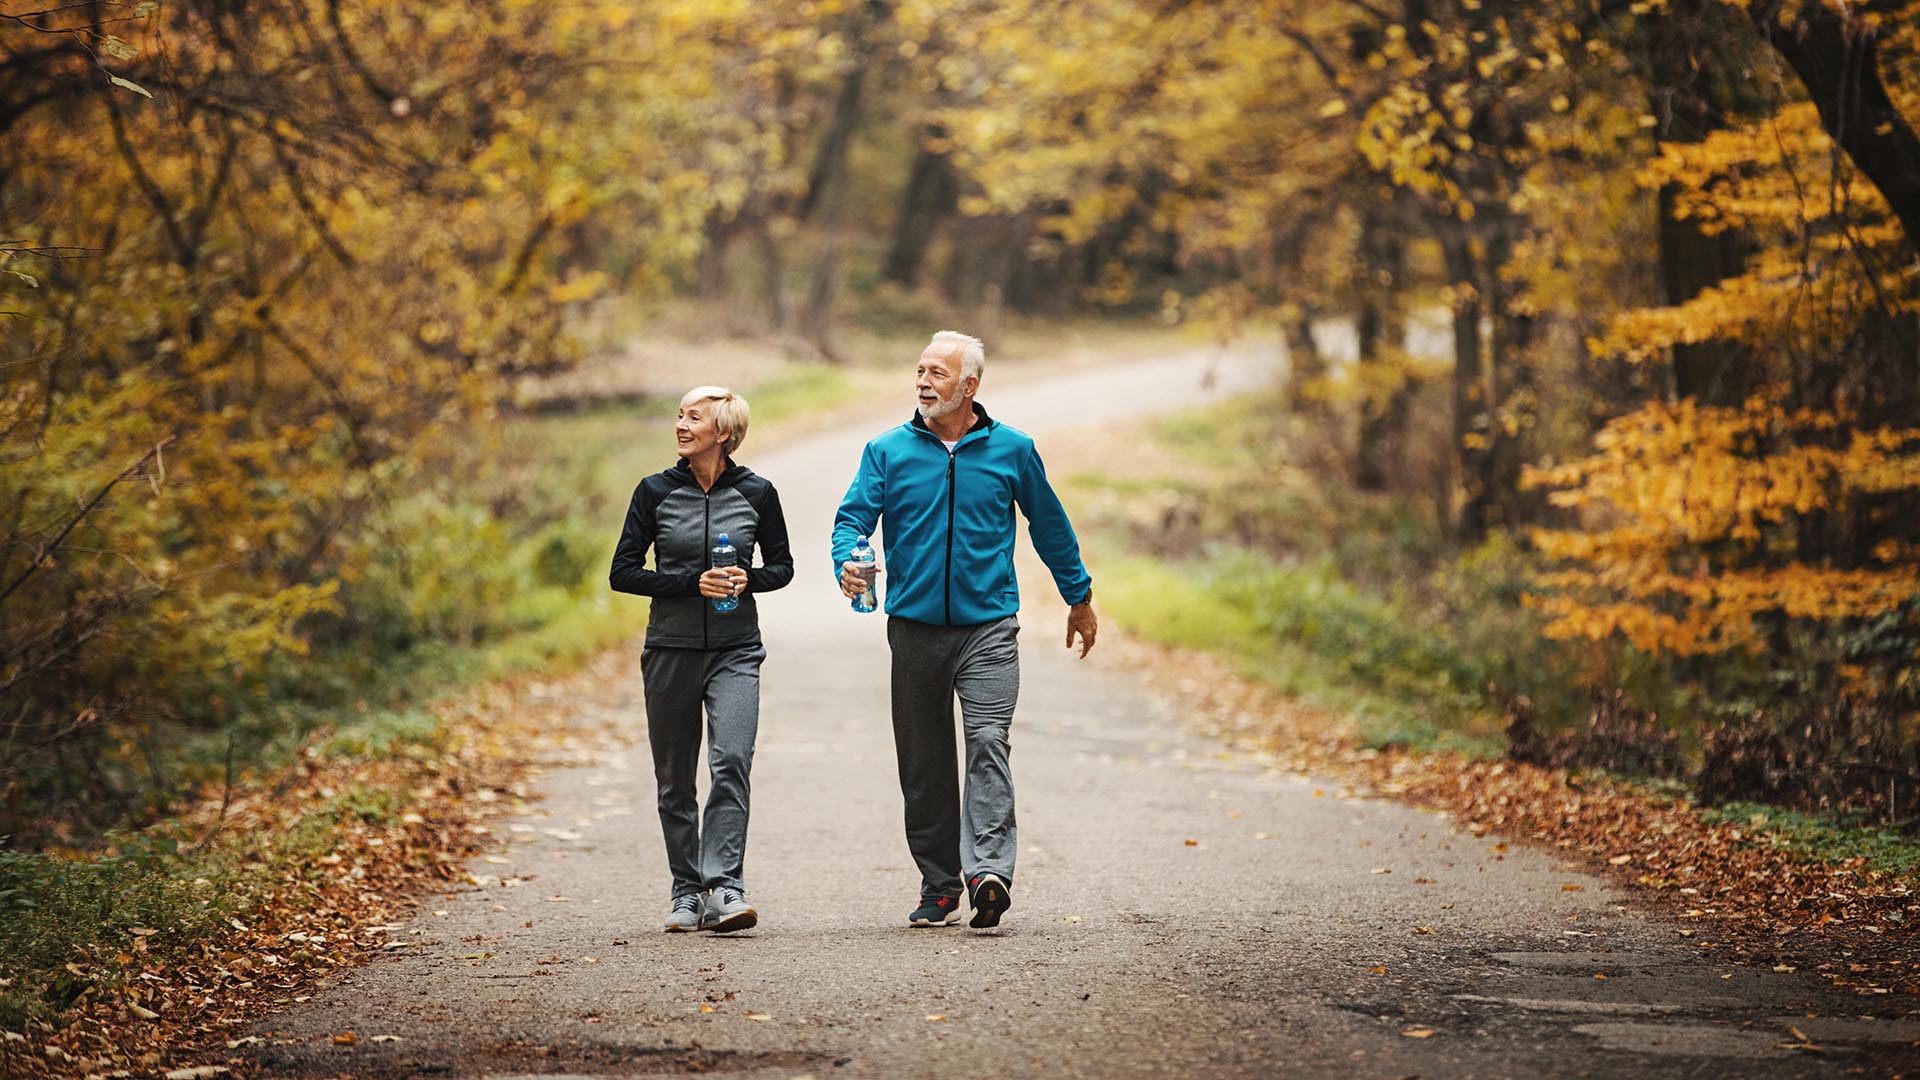 From the age of 65, some specialists advise 7,000 steps a day for at least five days a week (Getty Images)